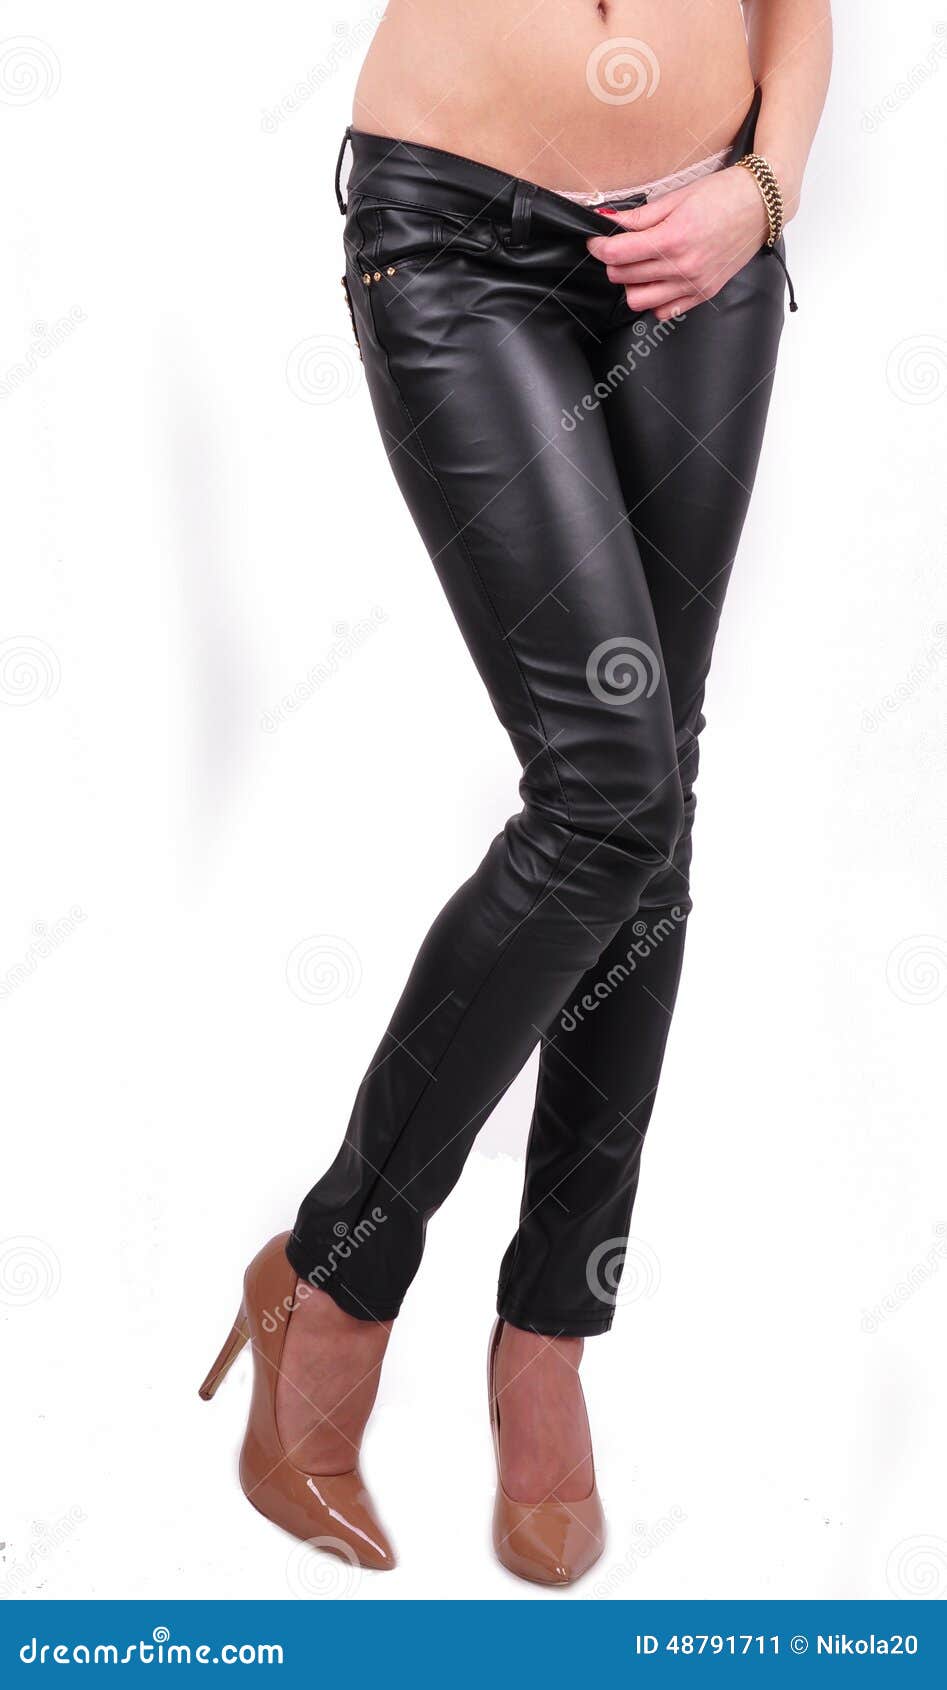 Long Legs in Skinny Leather Pants and High Heel Stock Image - Image of ...